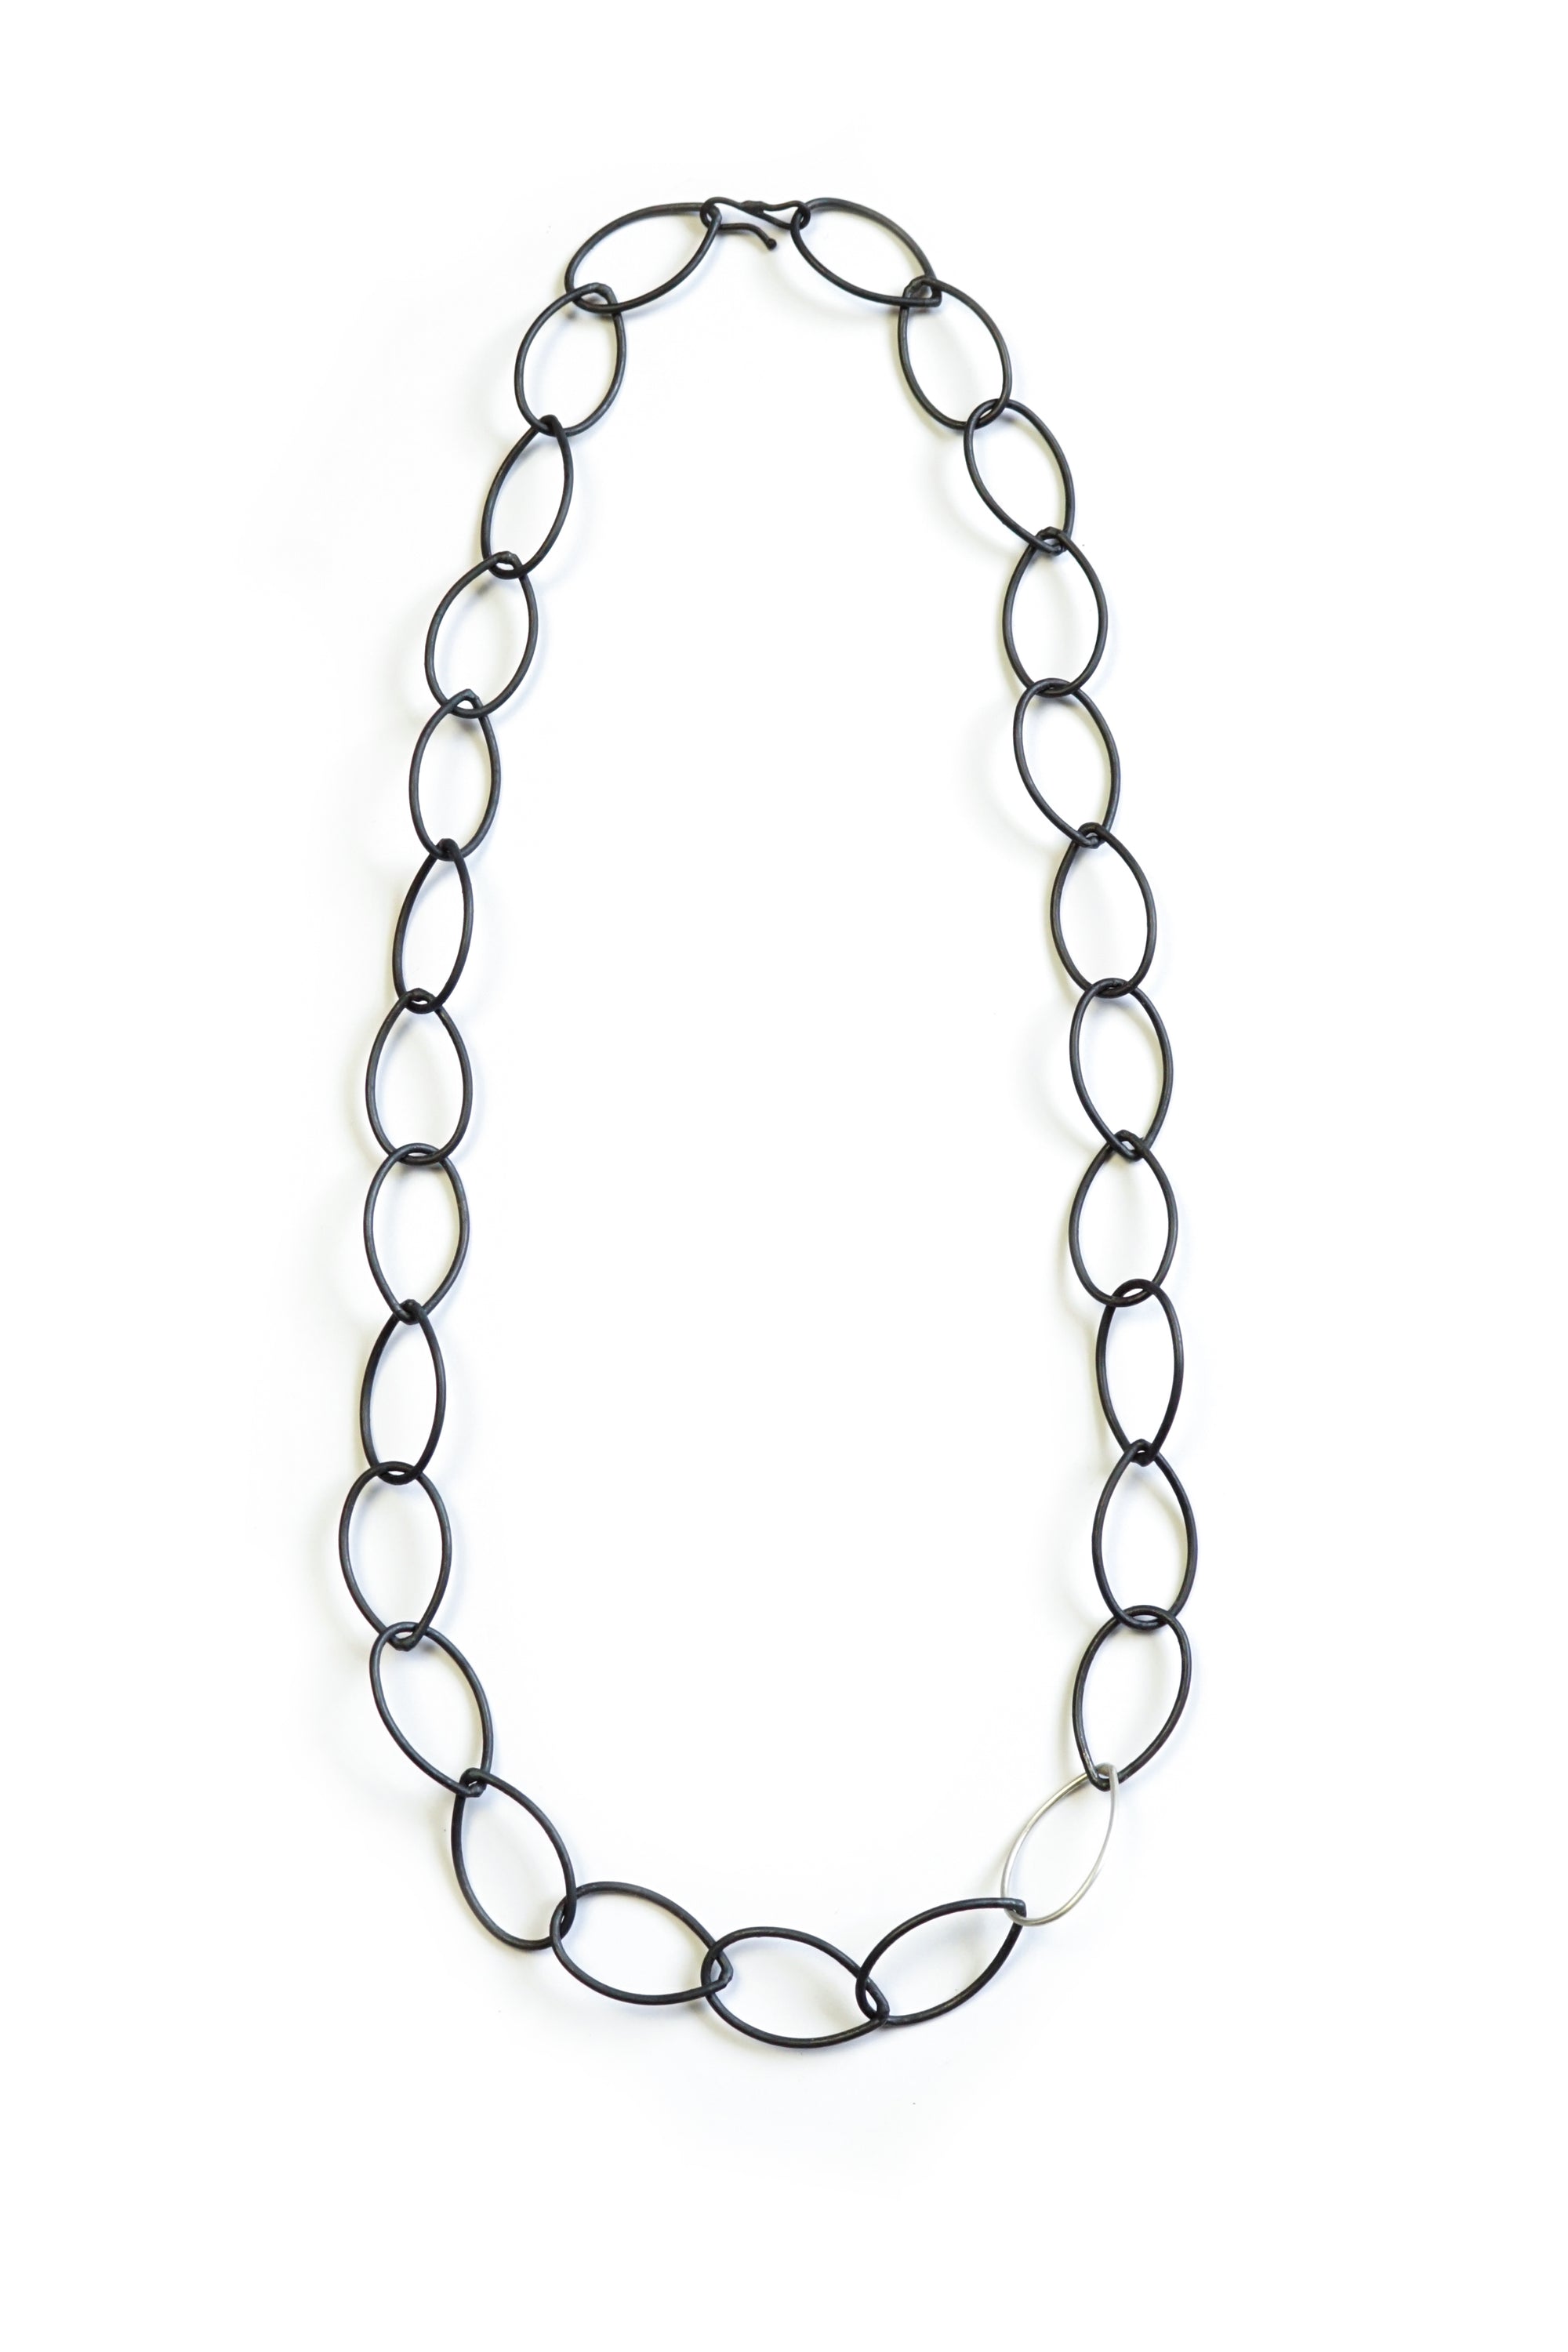 Ellen necklace - steel with silver accent